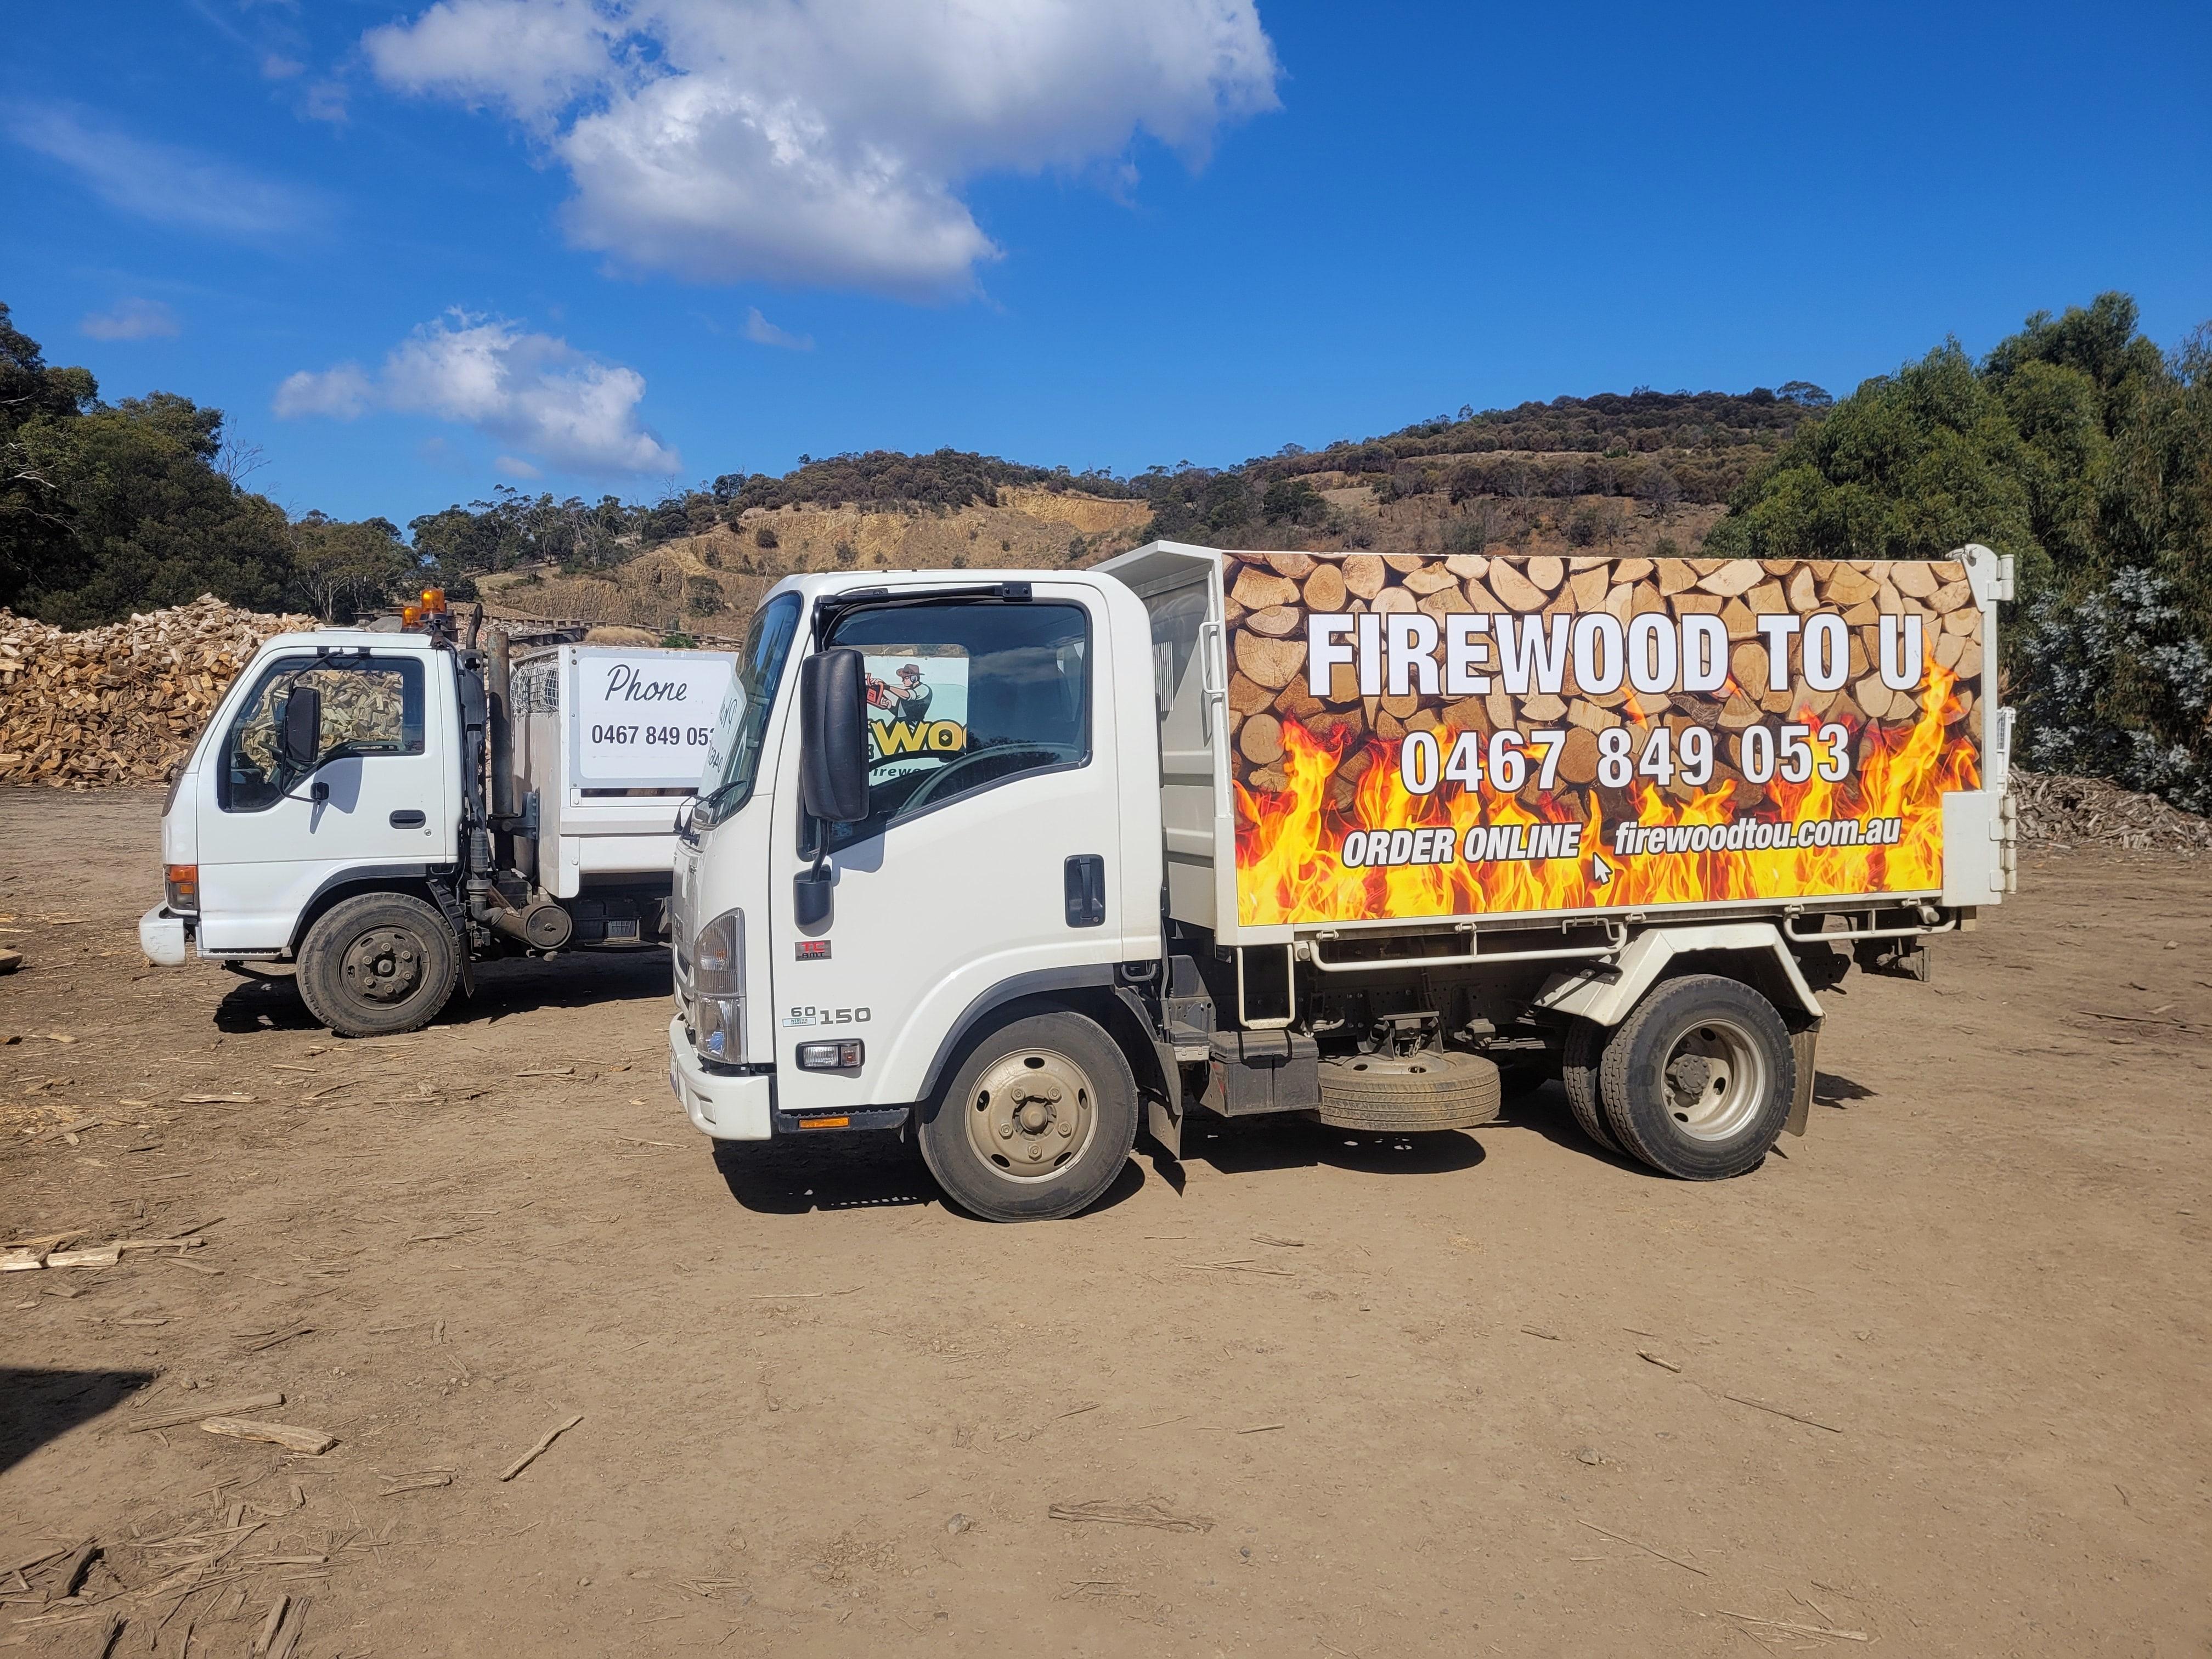 Photo of two delivery trucks loaded with firewood